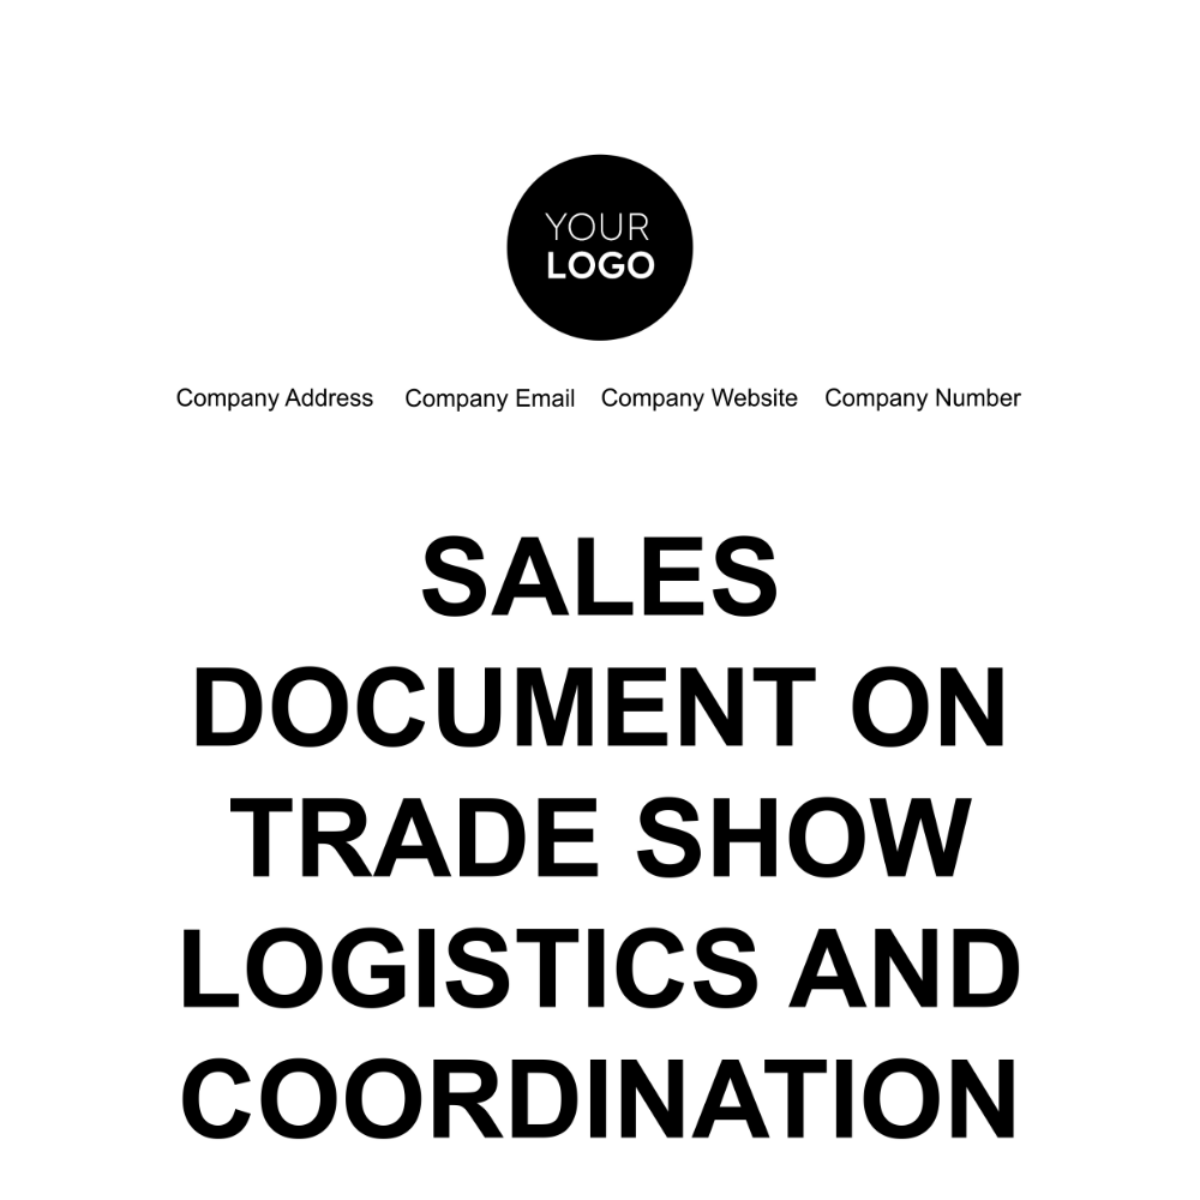 Sales Document on Trade Show Logistics and Coordination Template